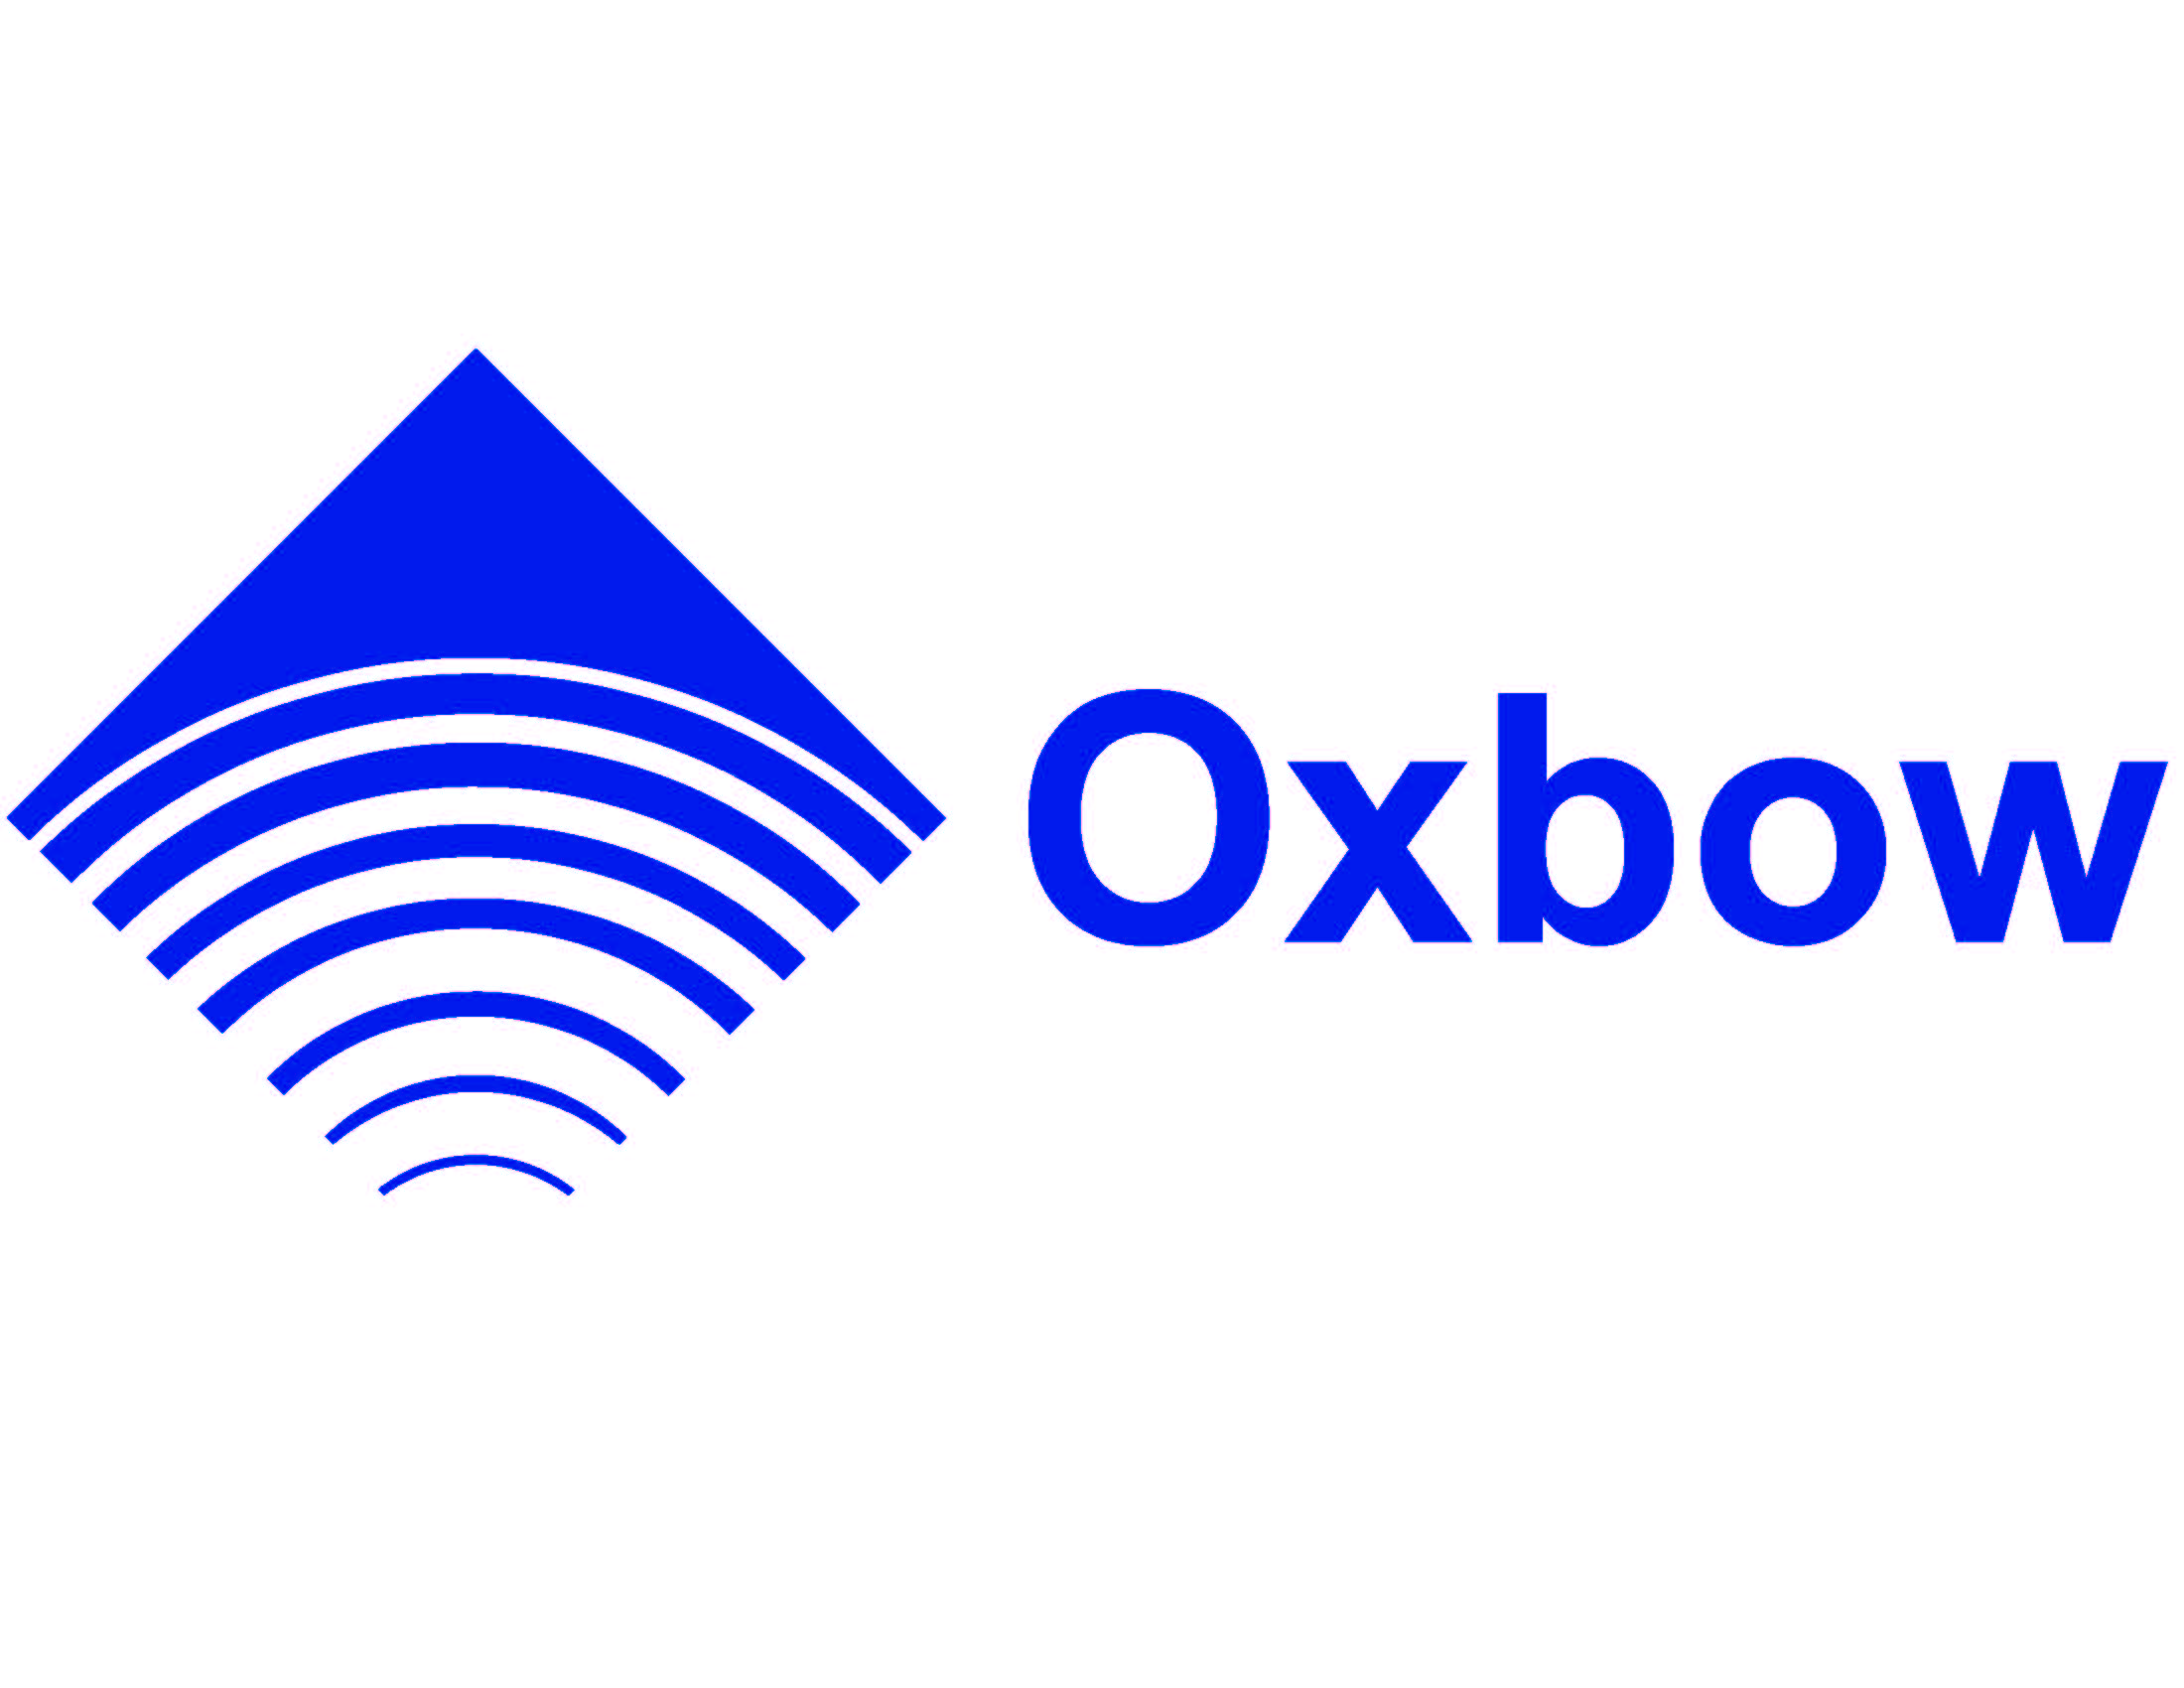 c. Oxbow Carbon LLC (Supporting)